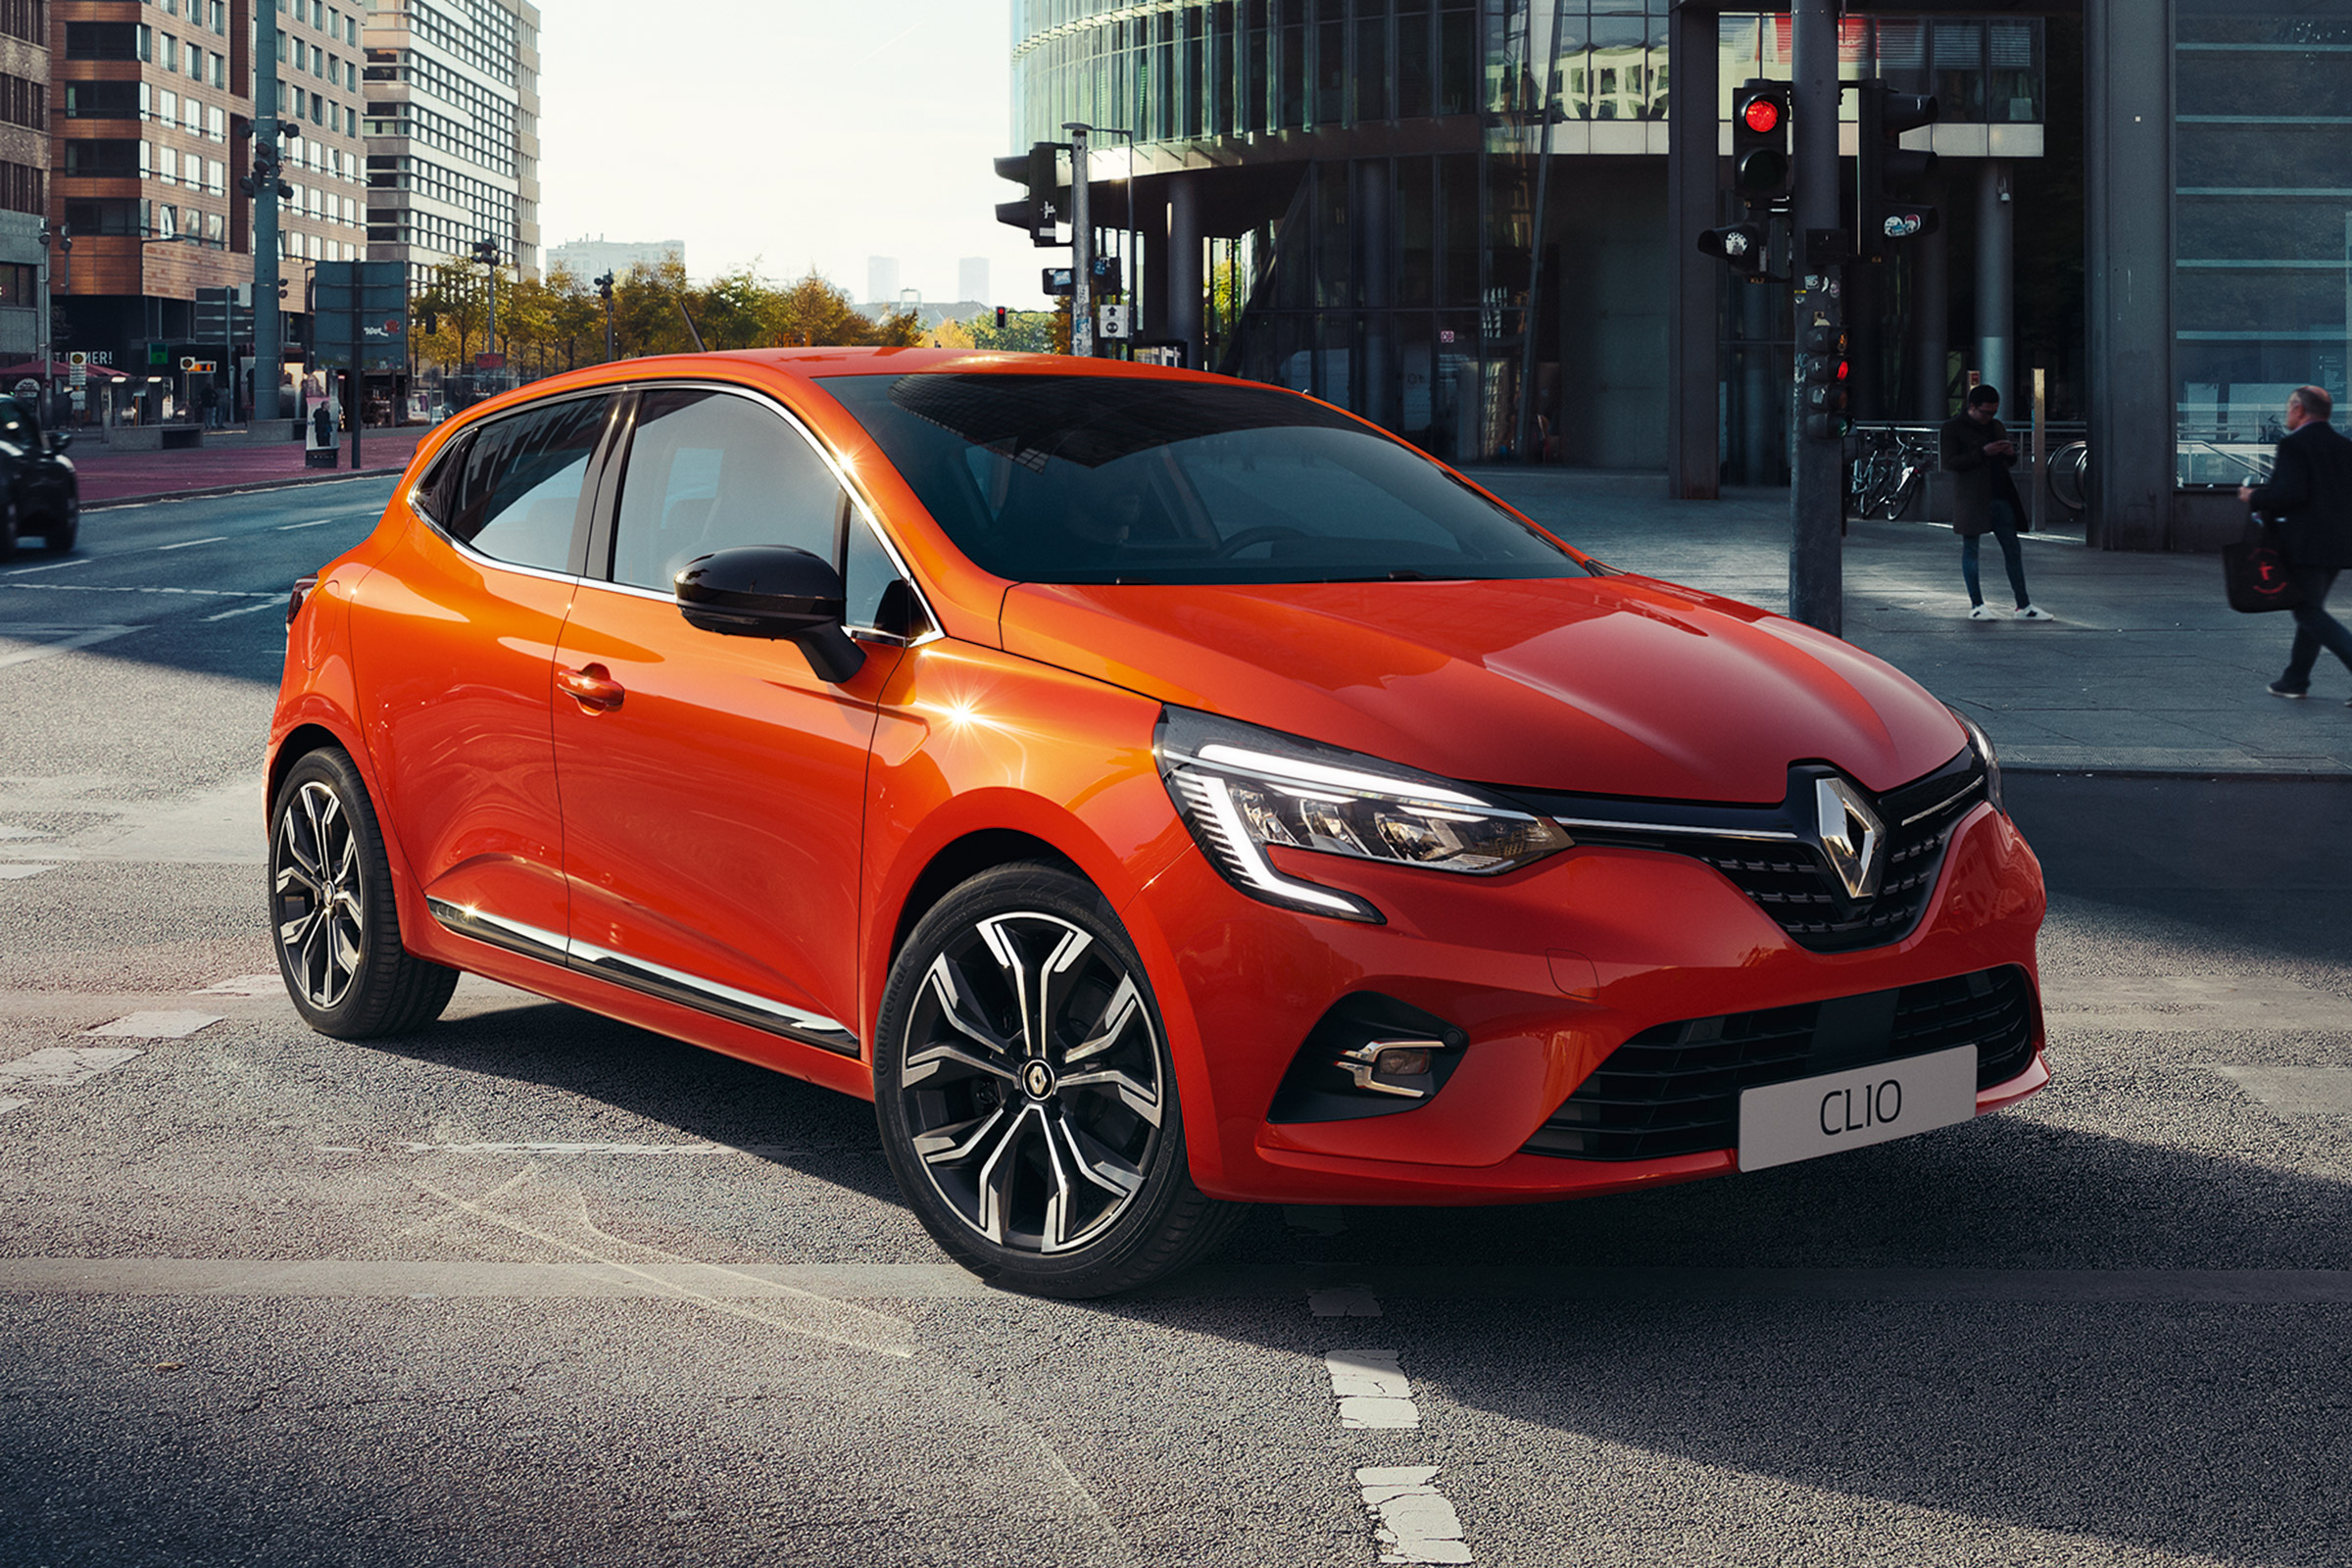 New 2020 Renault Clio E Tech Hybrid Model Starts At £19595 Pictures